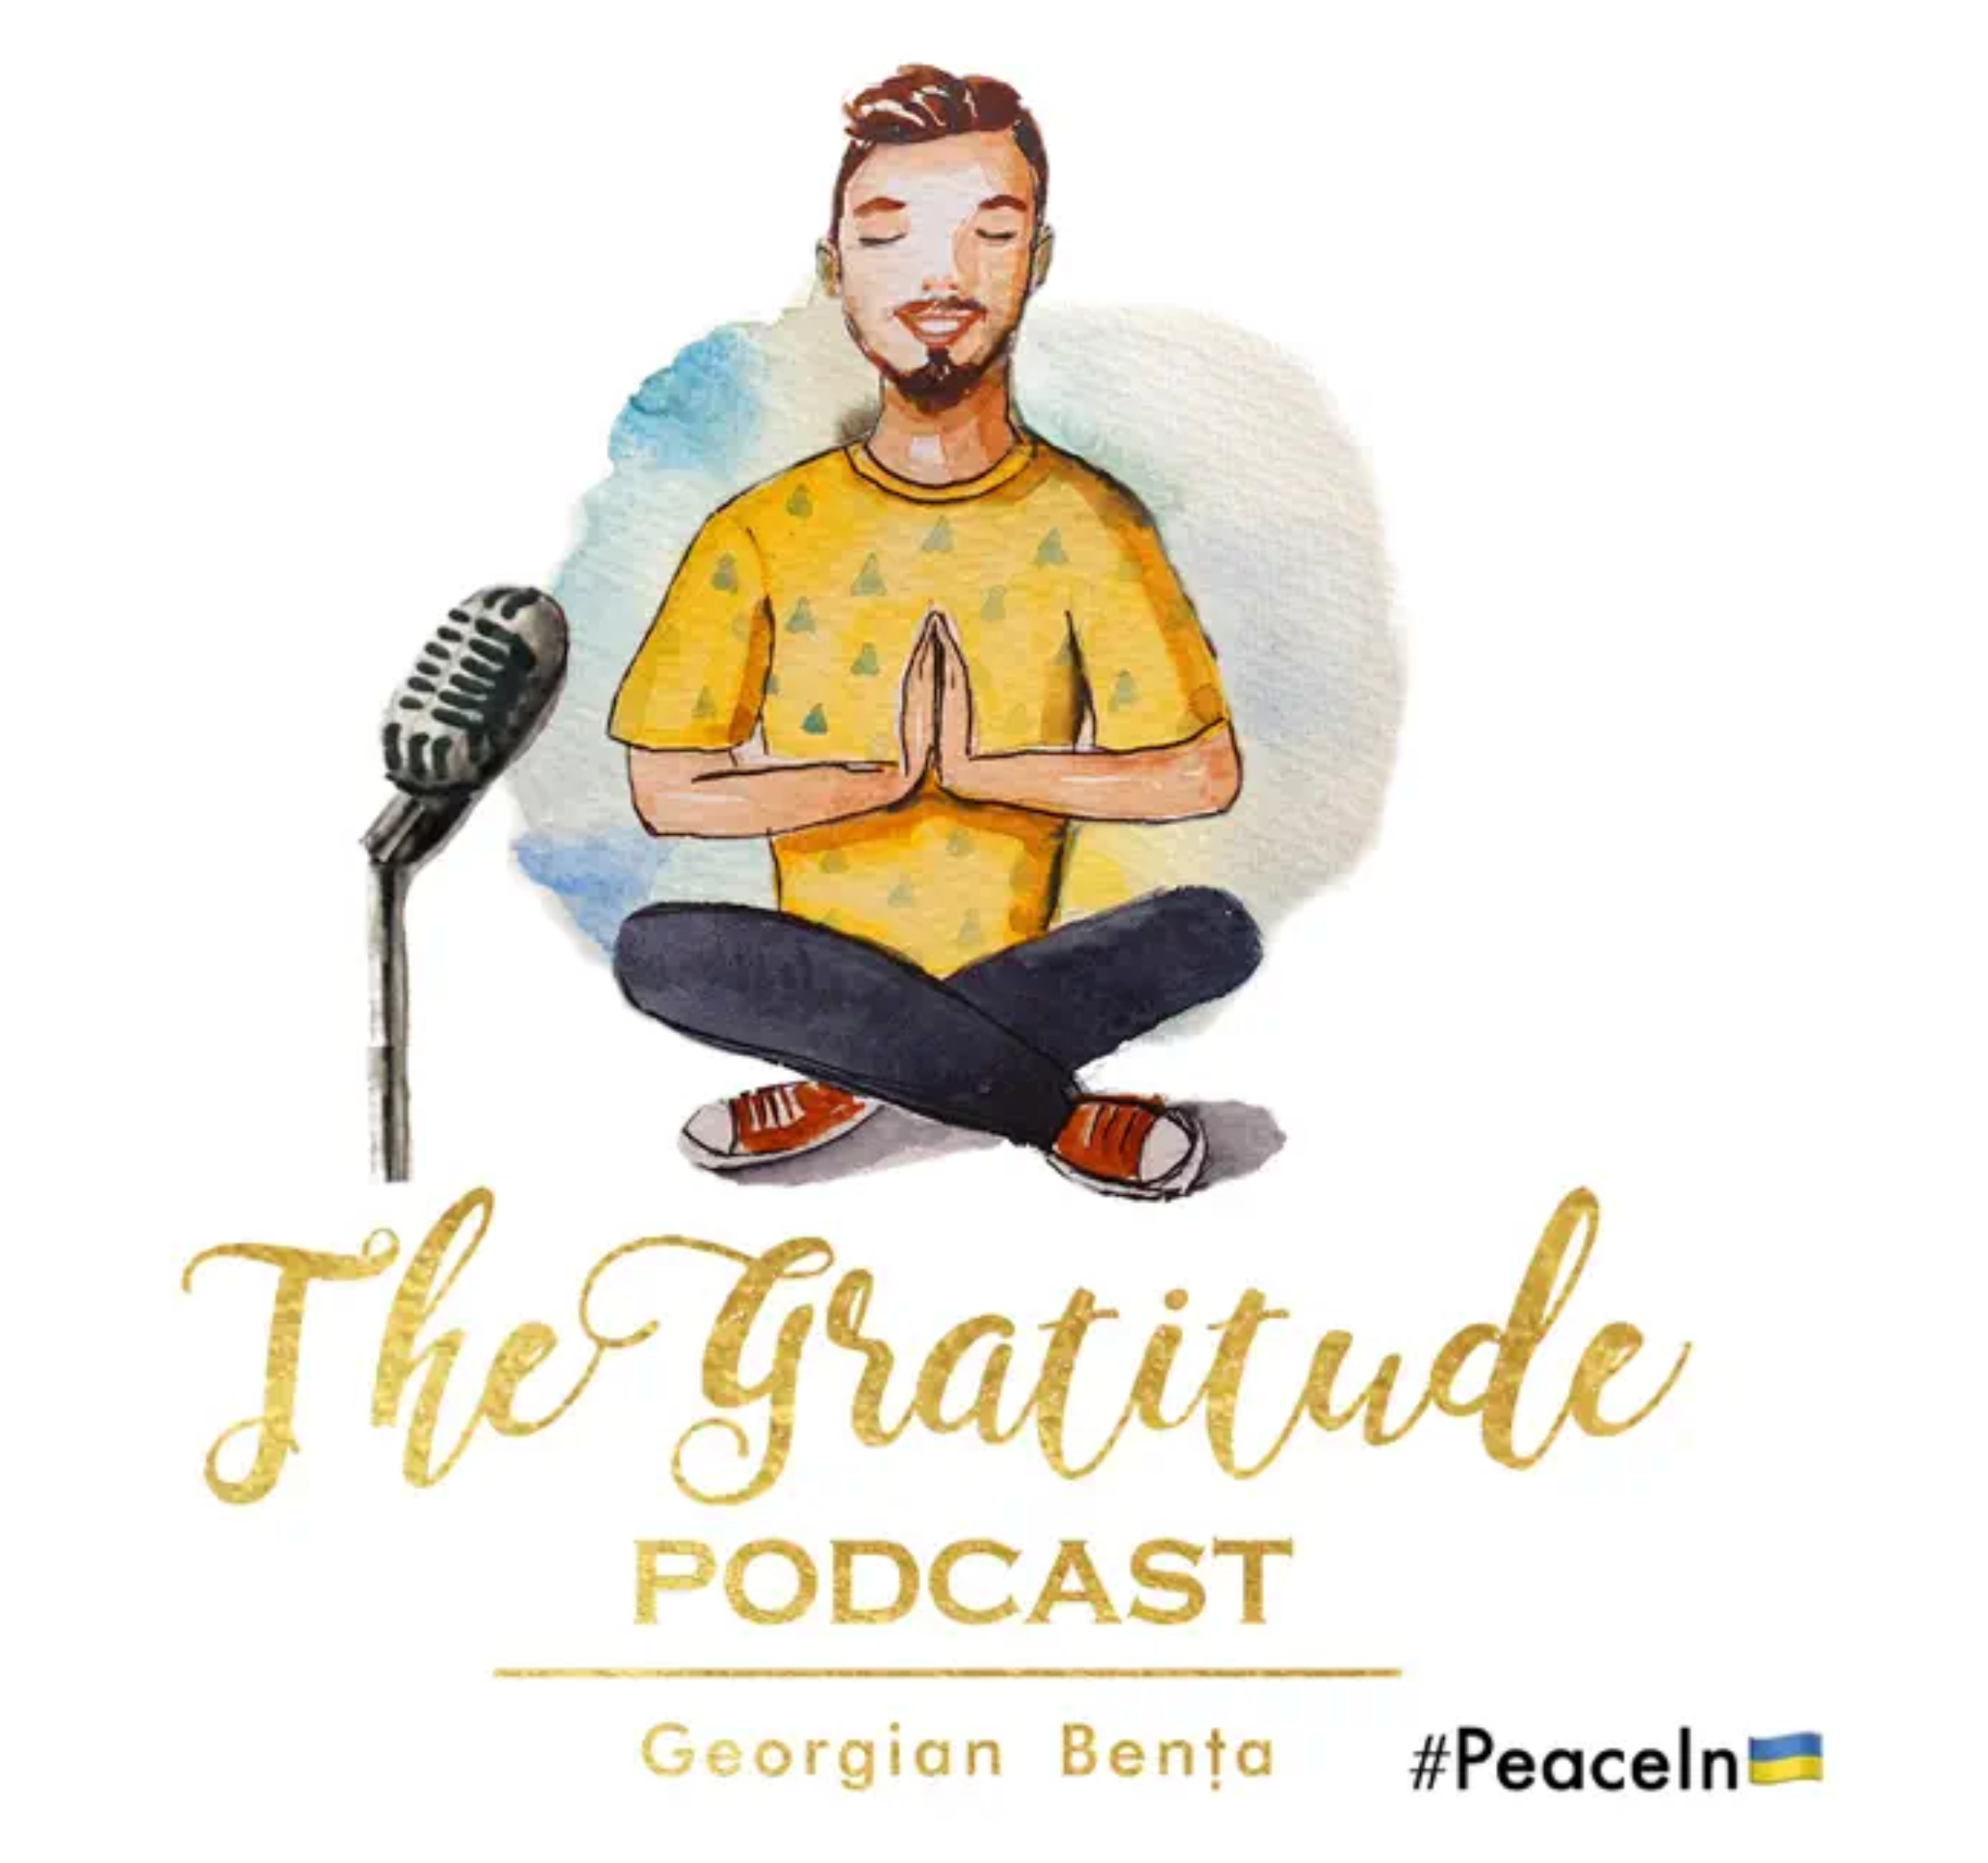 Experiences Make Us Grateful - an Interview on The Gratitude Podcast